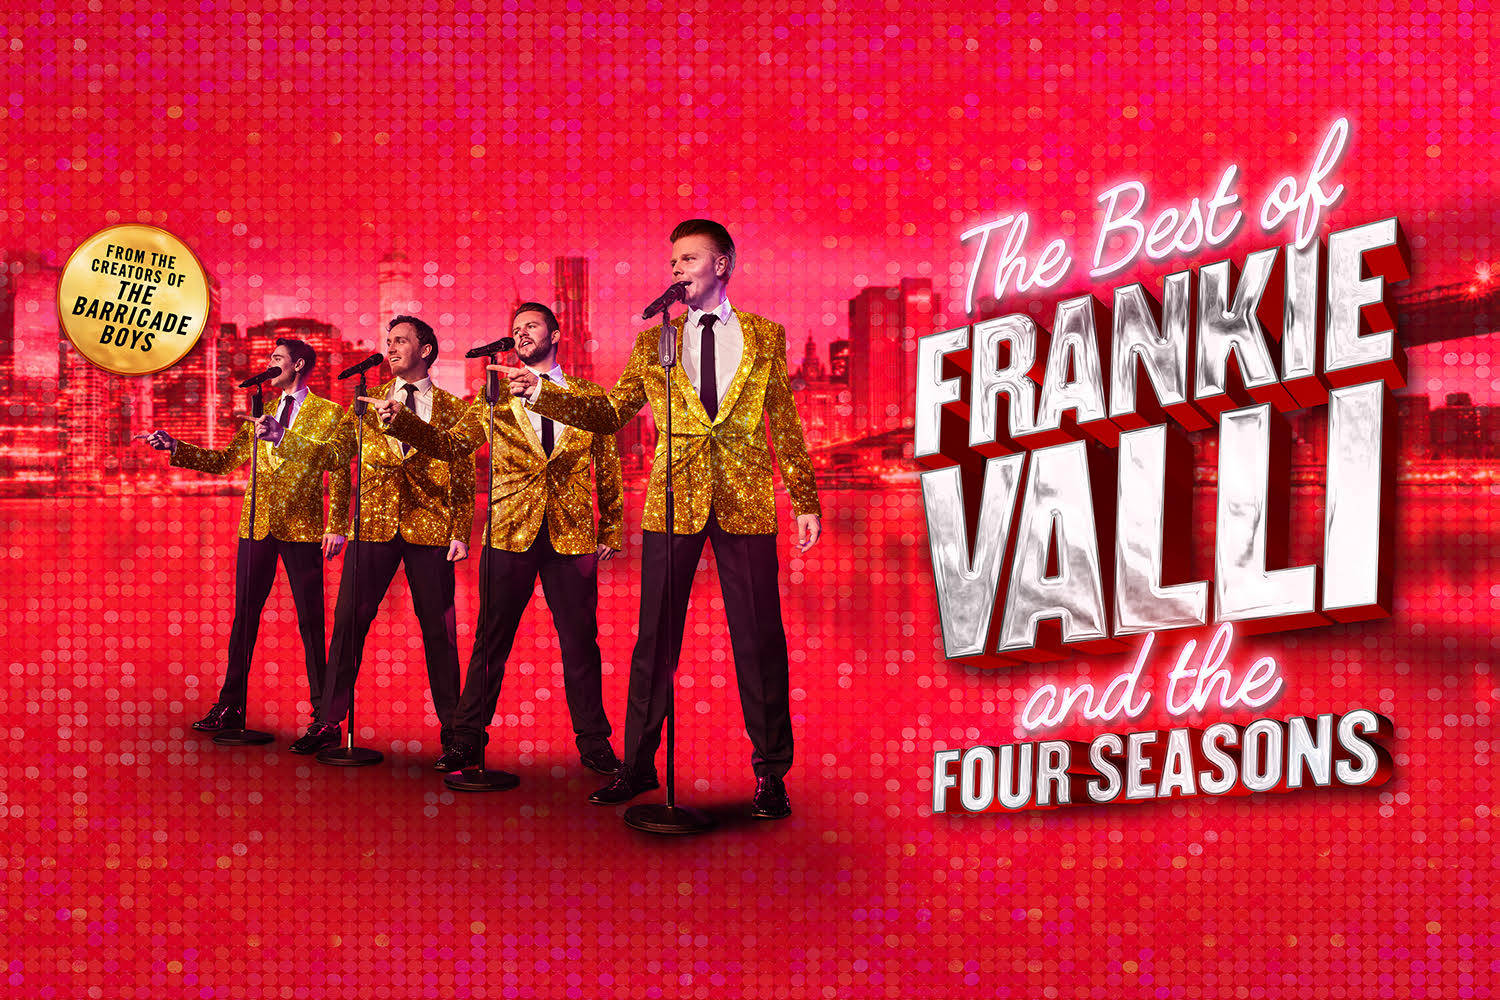 New Wolsey Frankie Valli And The Four Seasons Wallpaper